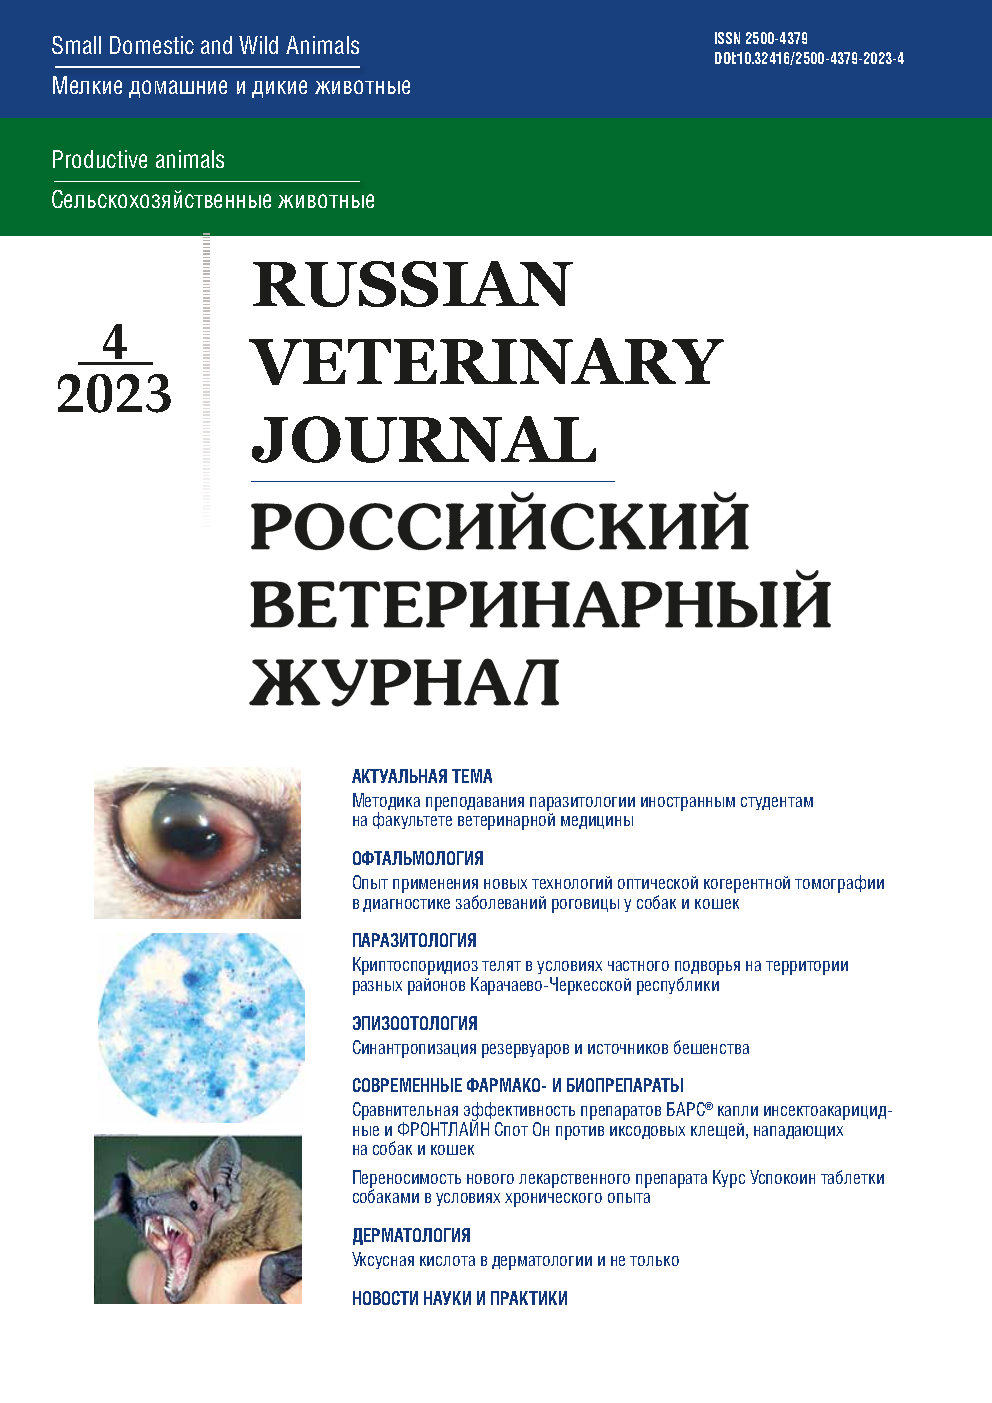                         Tolerability of the new drug Kurs Uspokoin tablets for dogs in chronic study
            